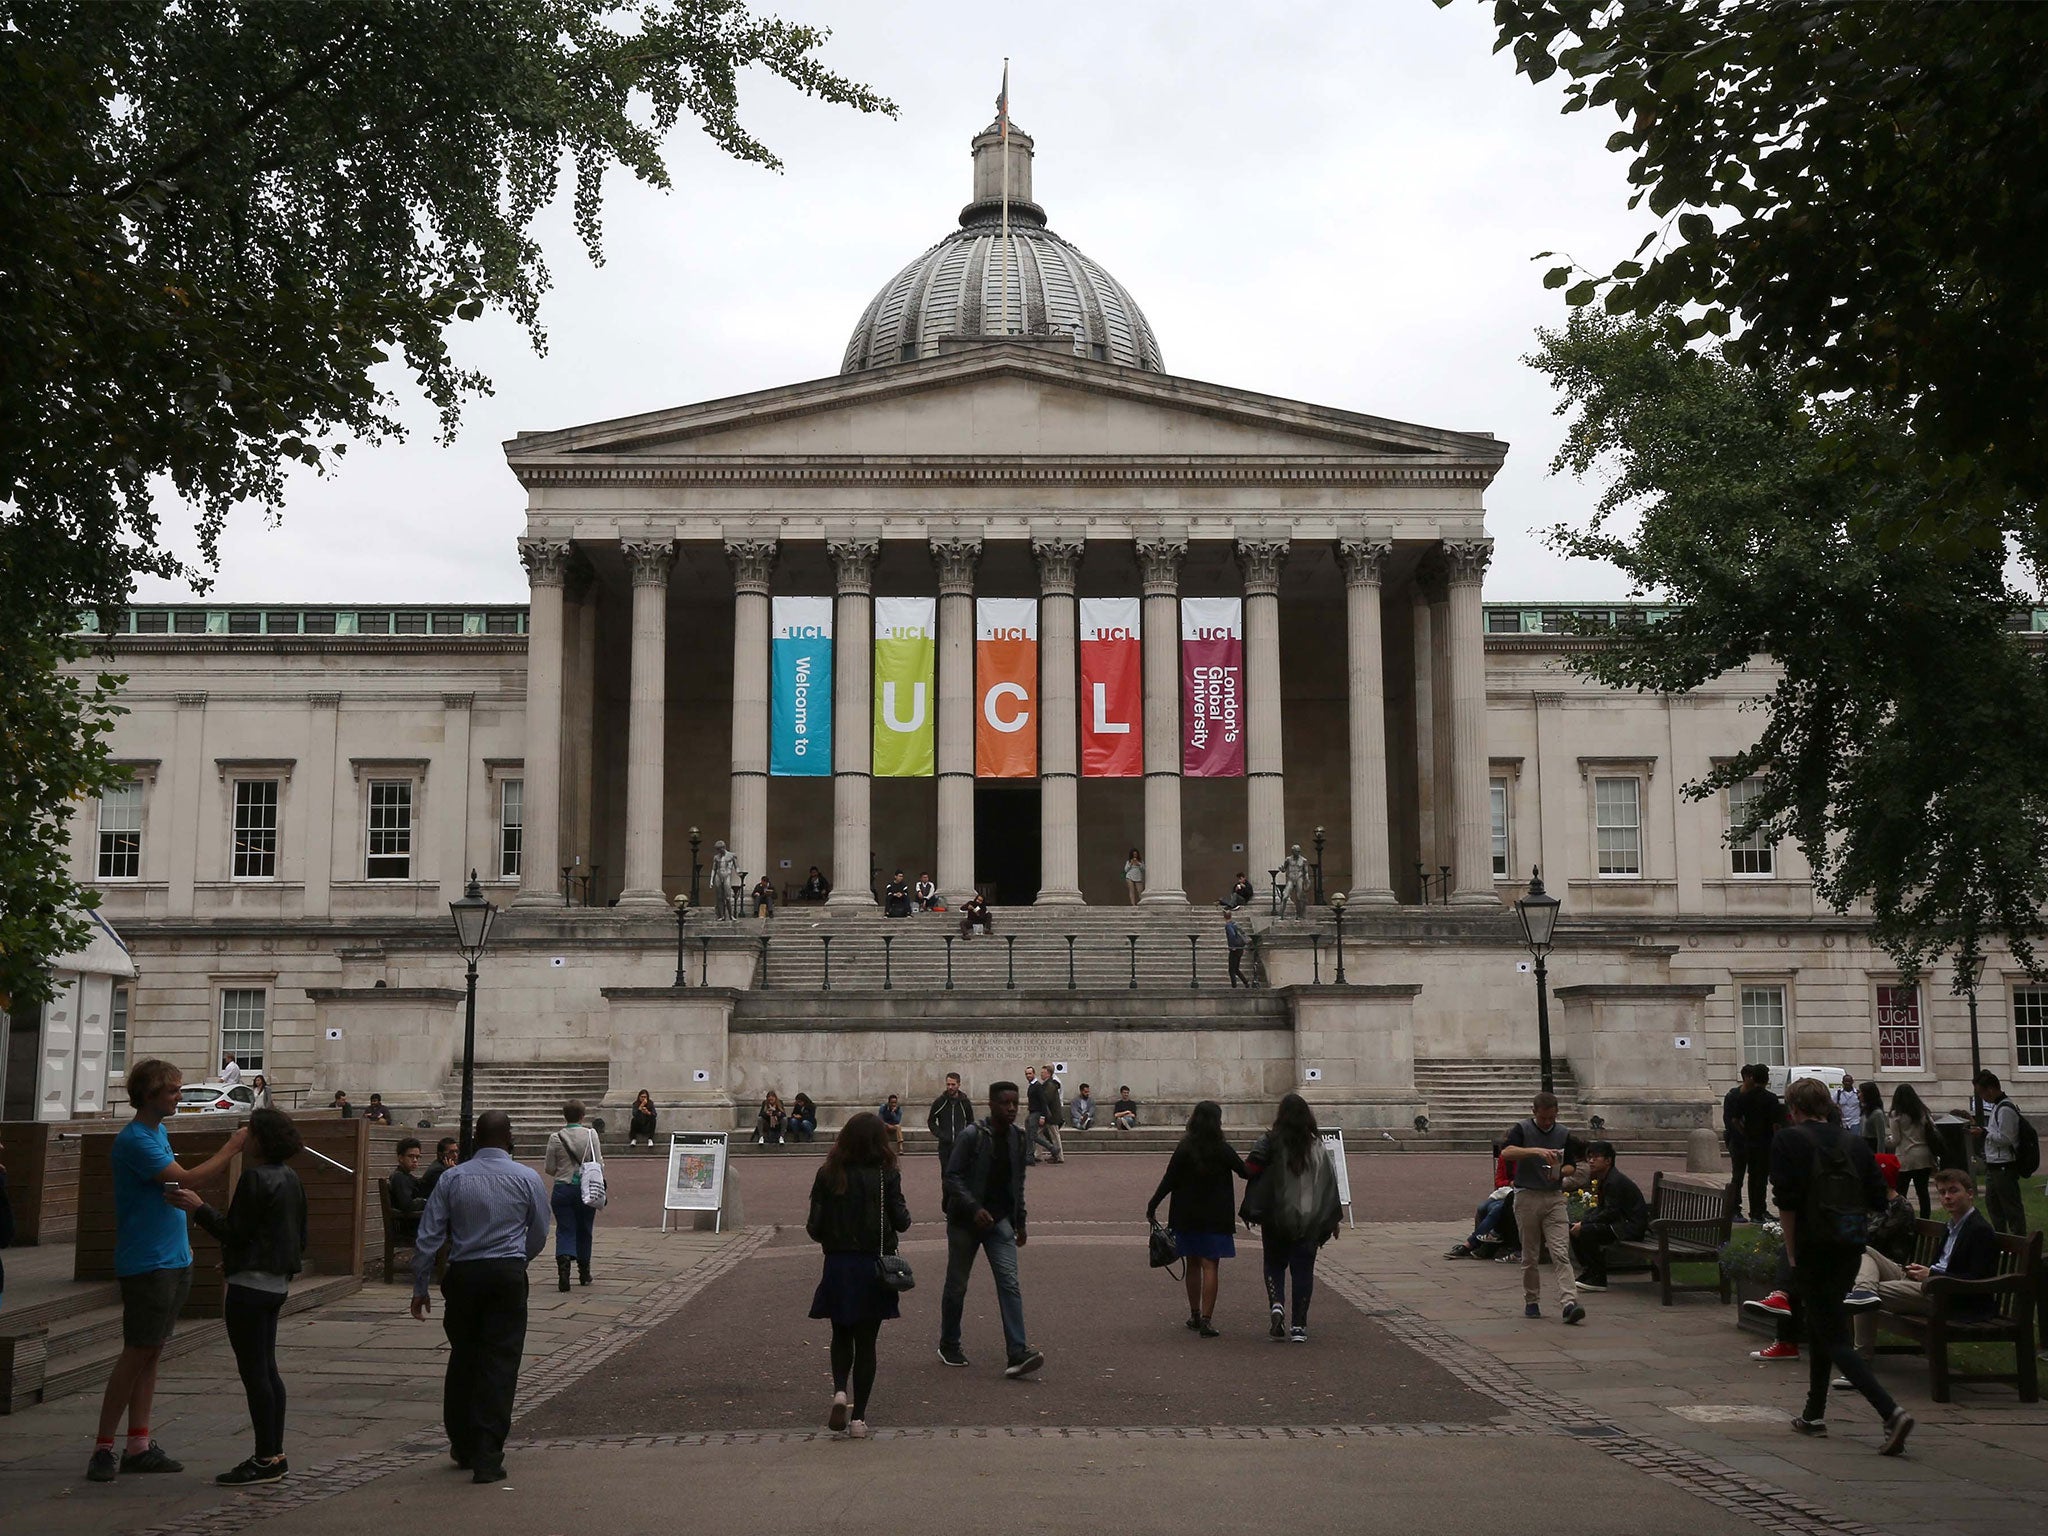 News broke today that secret eugenics conferences had been held at UCL